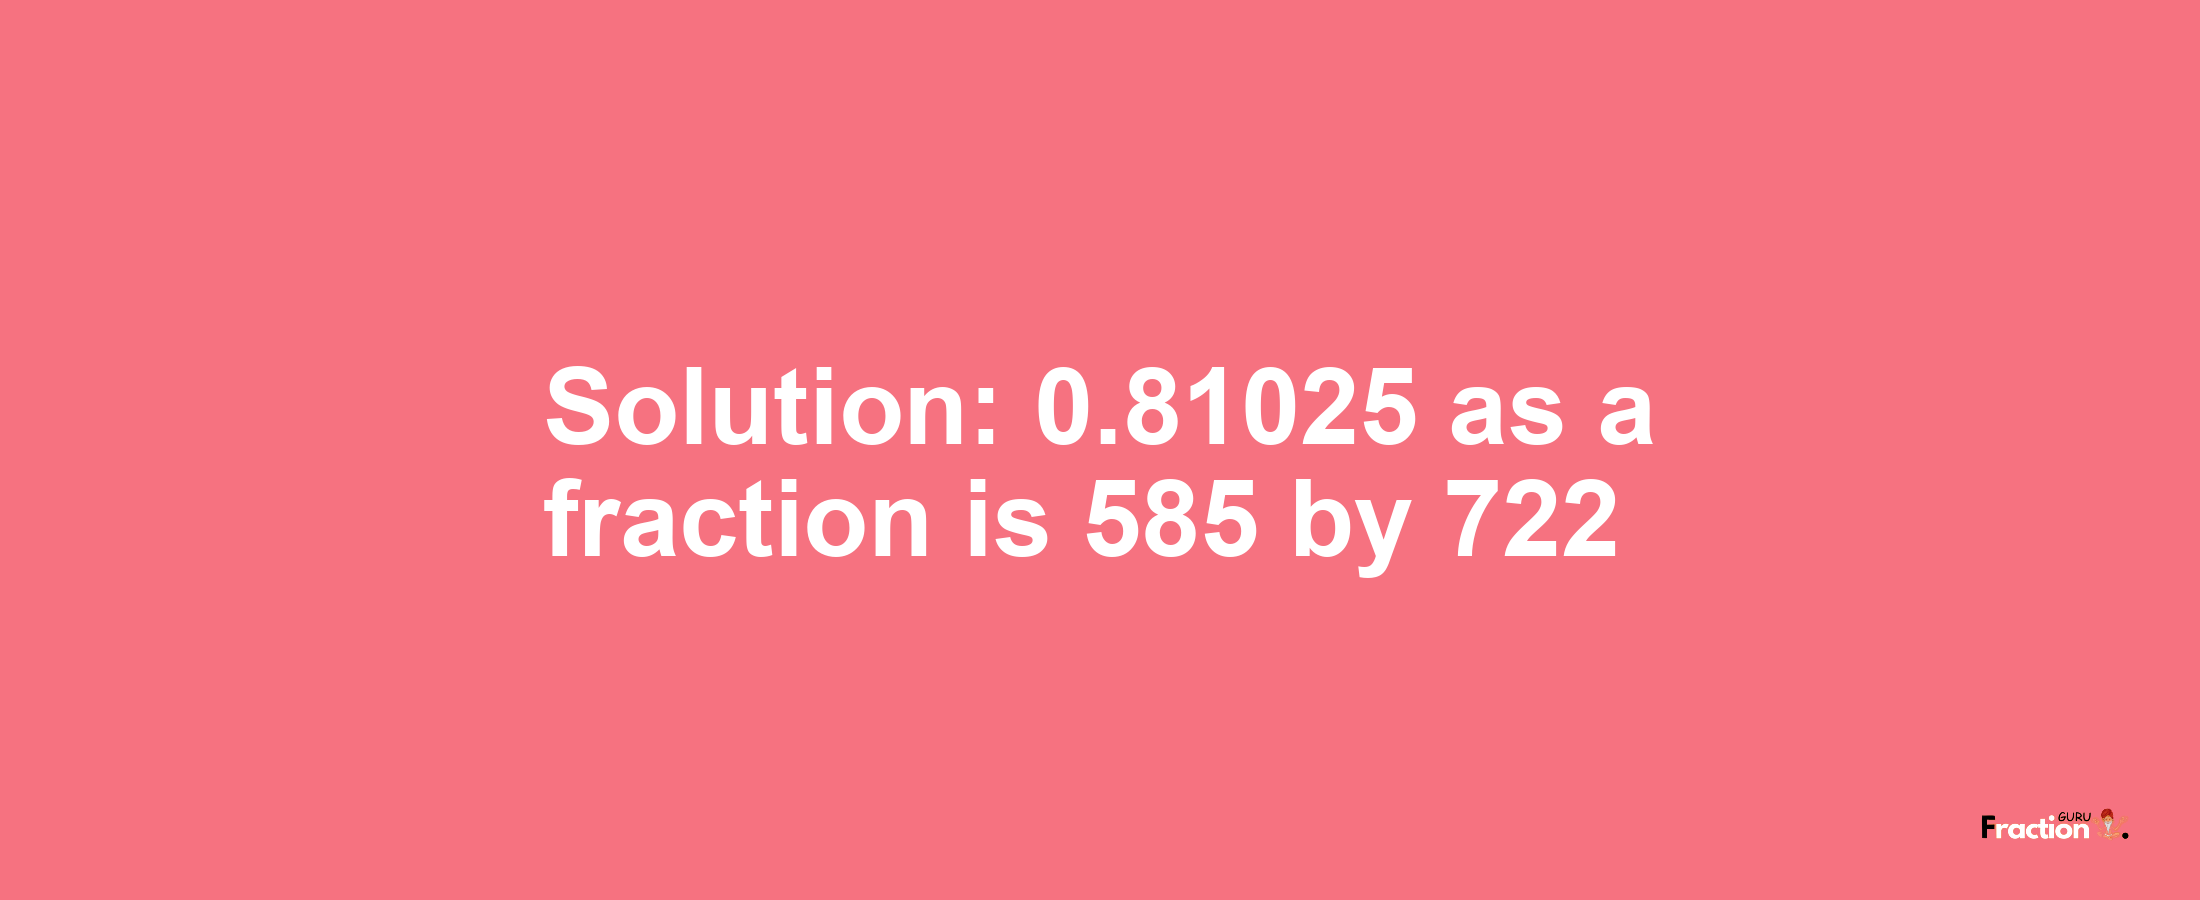 Solution:0.81025 as a fraction is 585/722